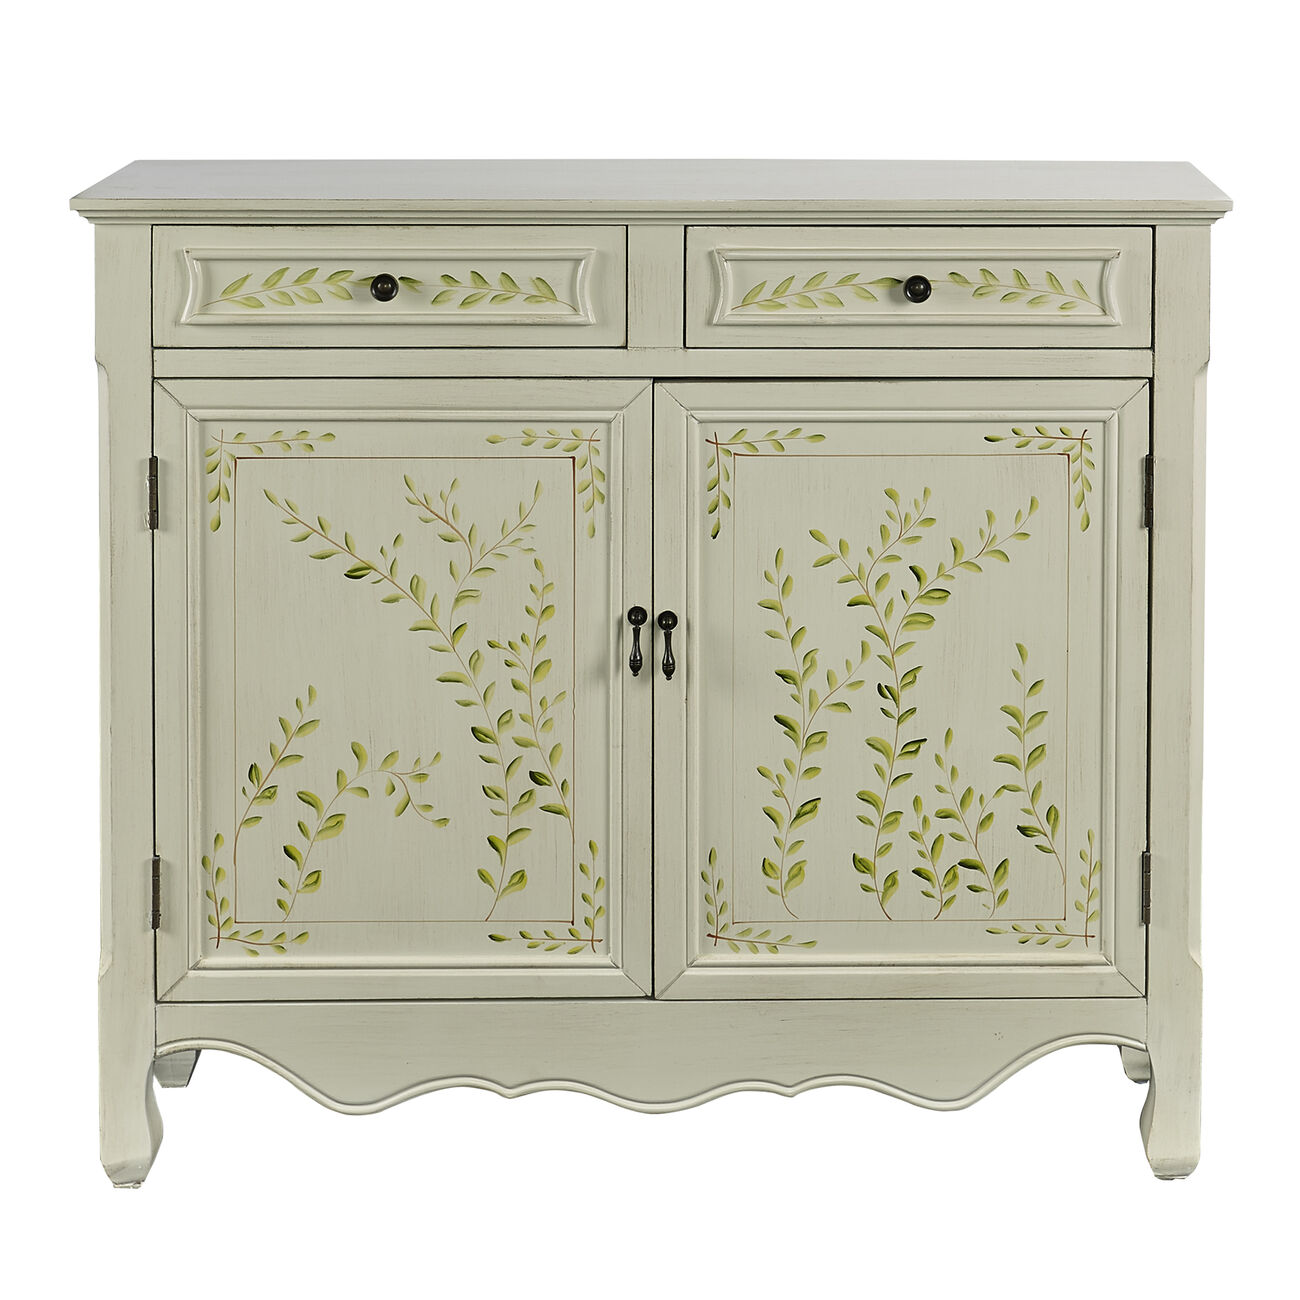 Wooden Hand Painted Console Table with 2 Doors and 2 Drawers, Antique White